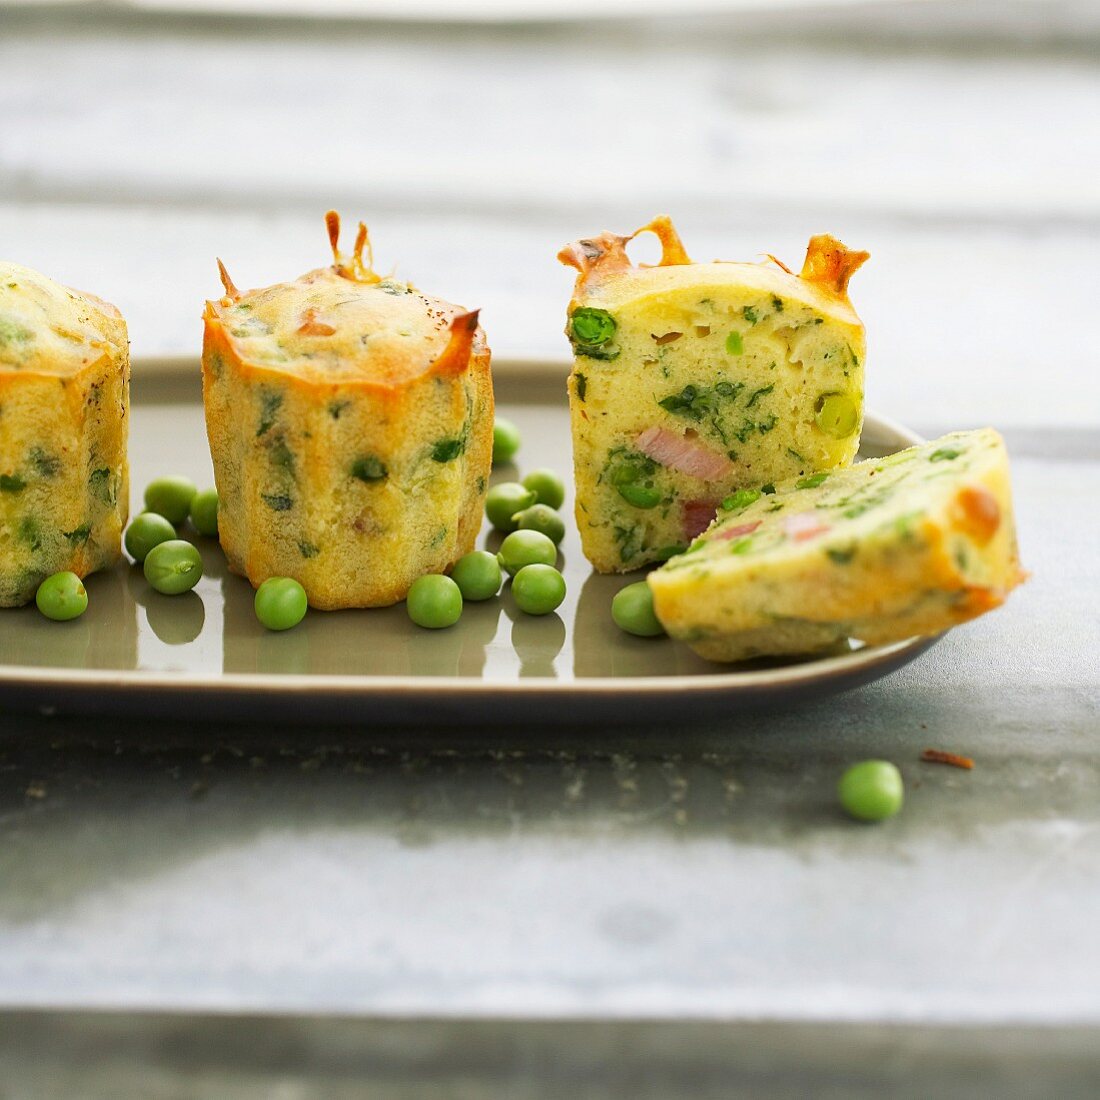 Pea and diced bacon Madeleines